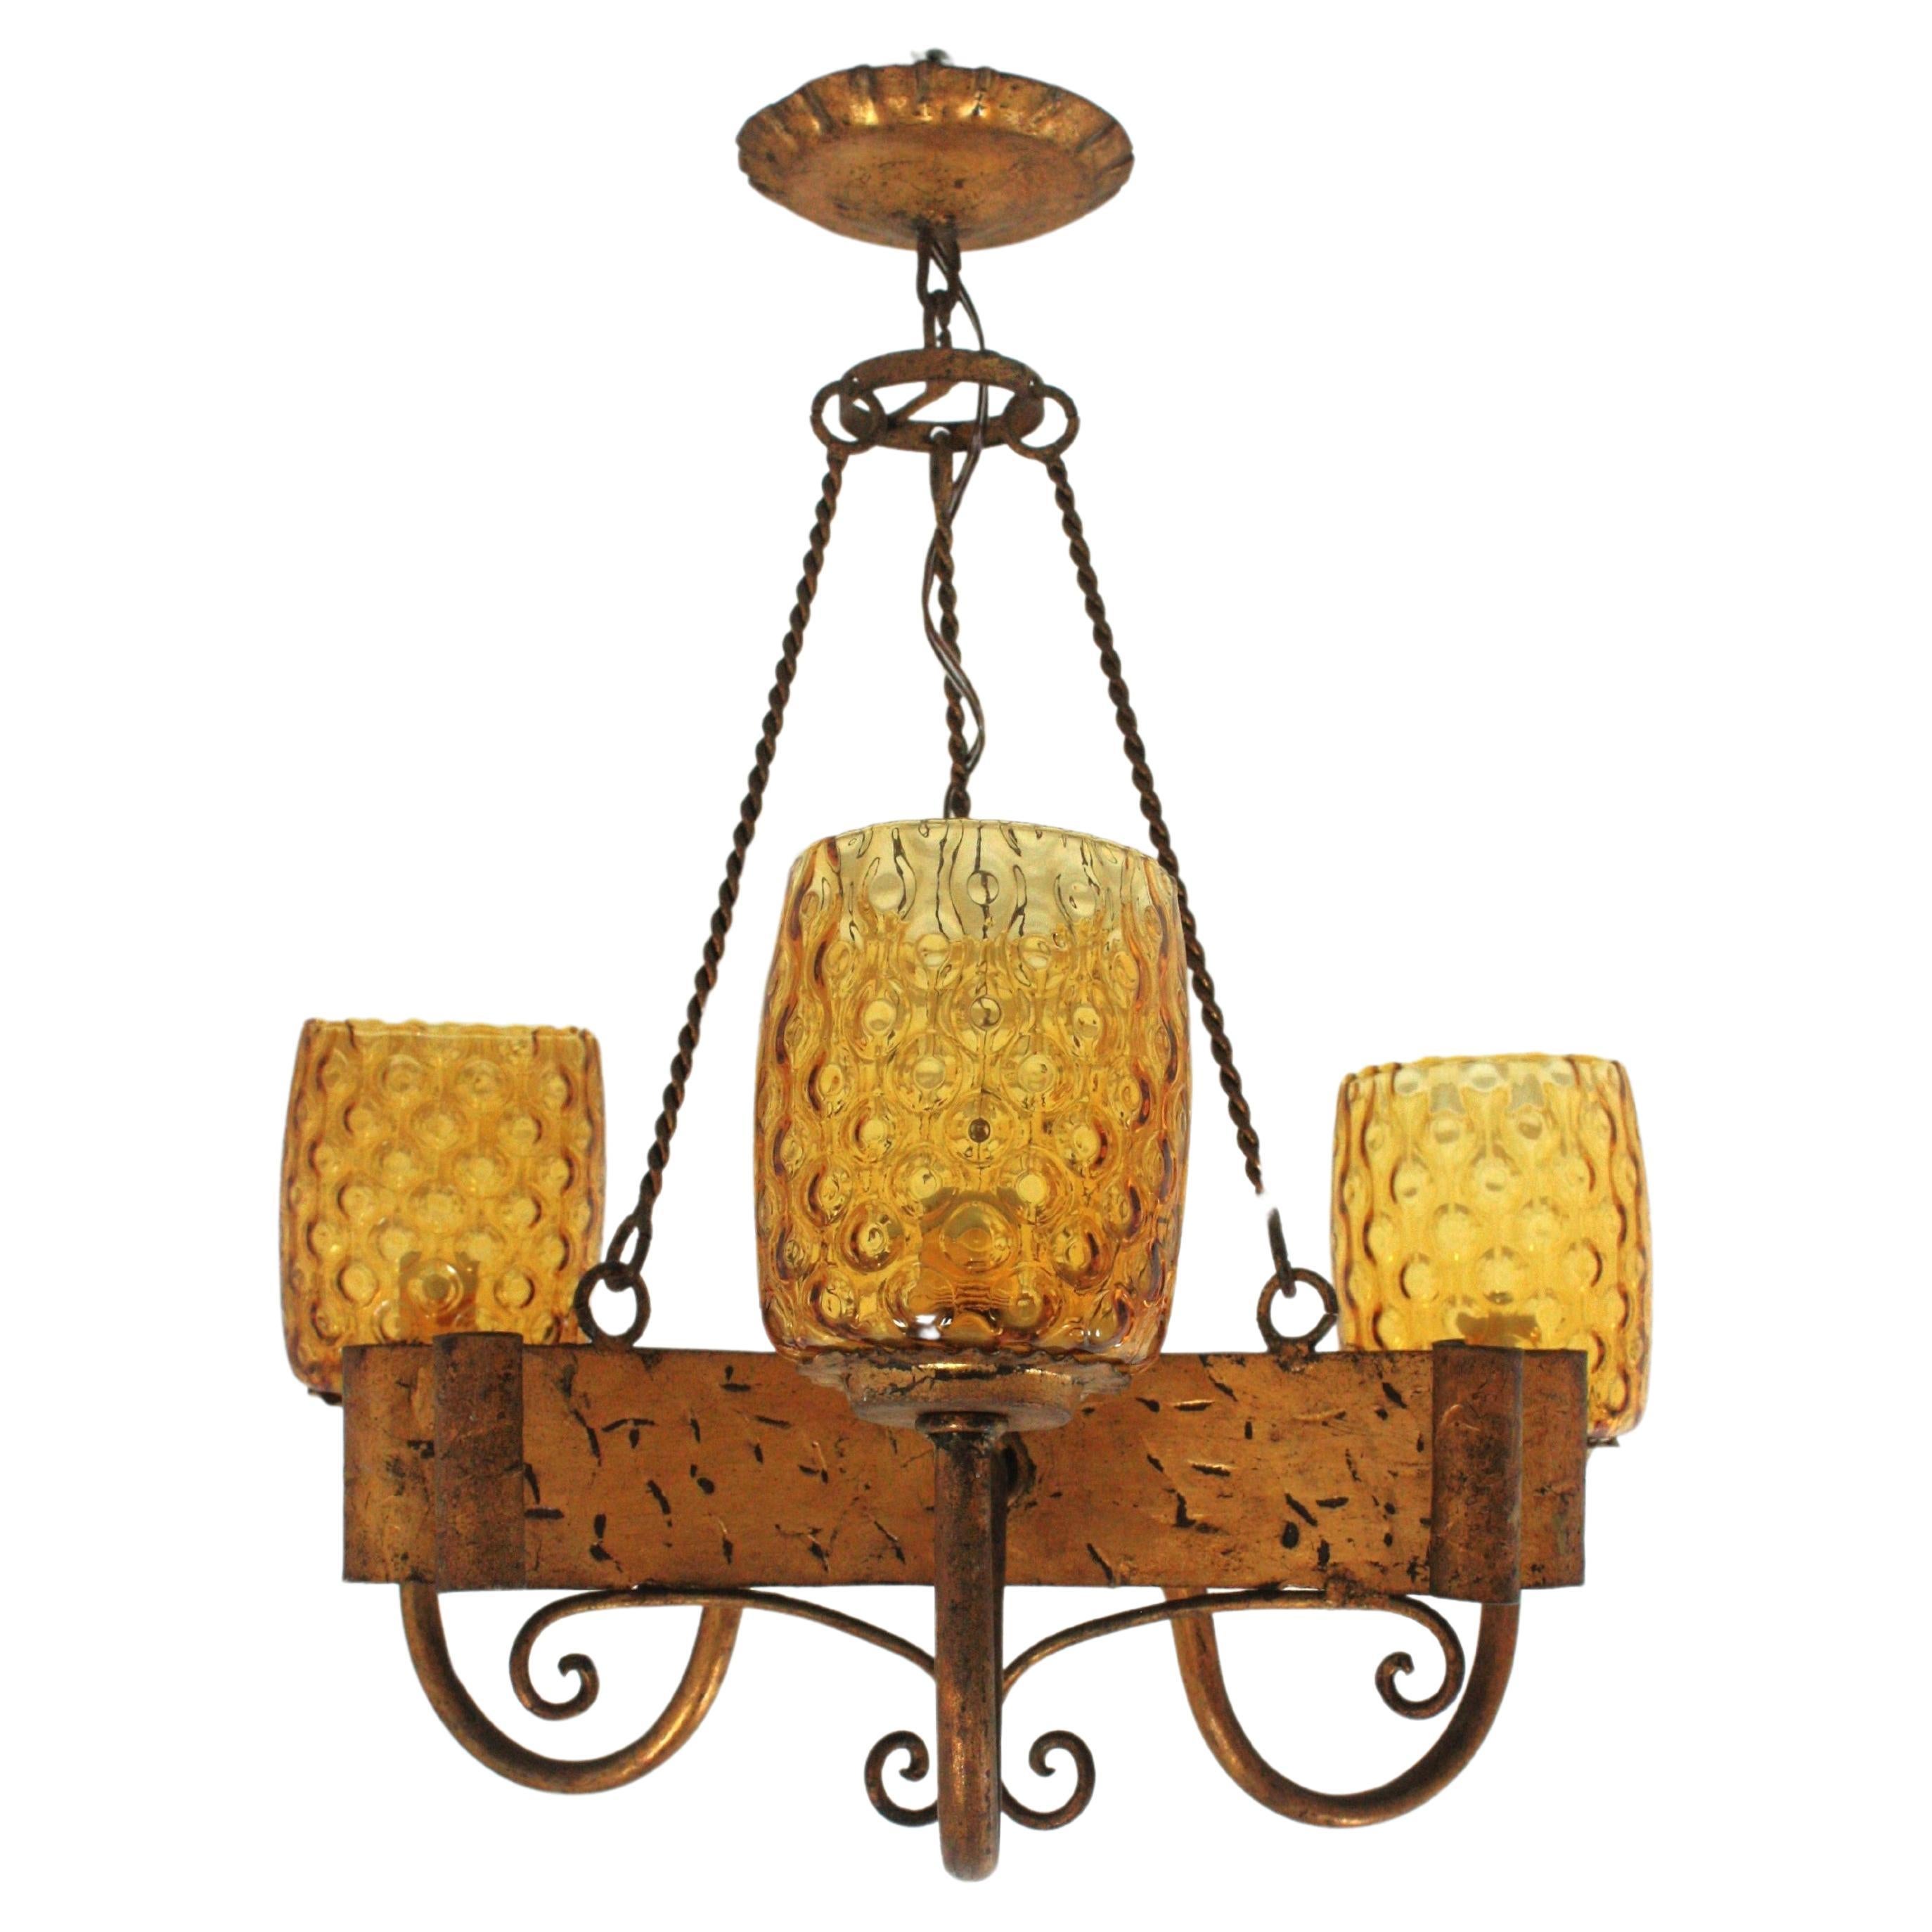 Spanish Gothic Style Chandelier with Amber Glass Shades, Gilt Wrought Iron